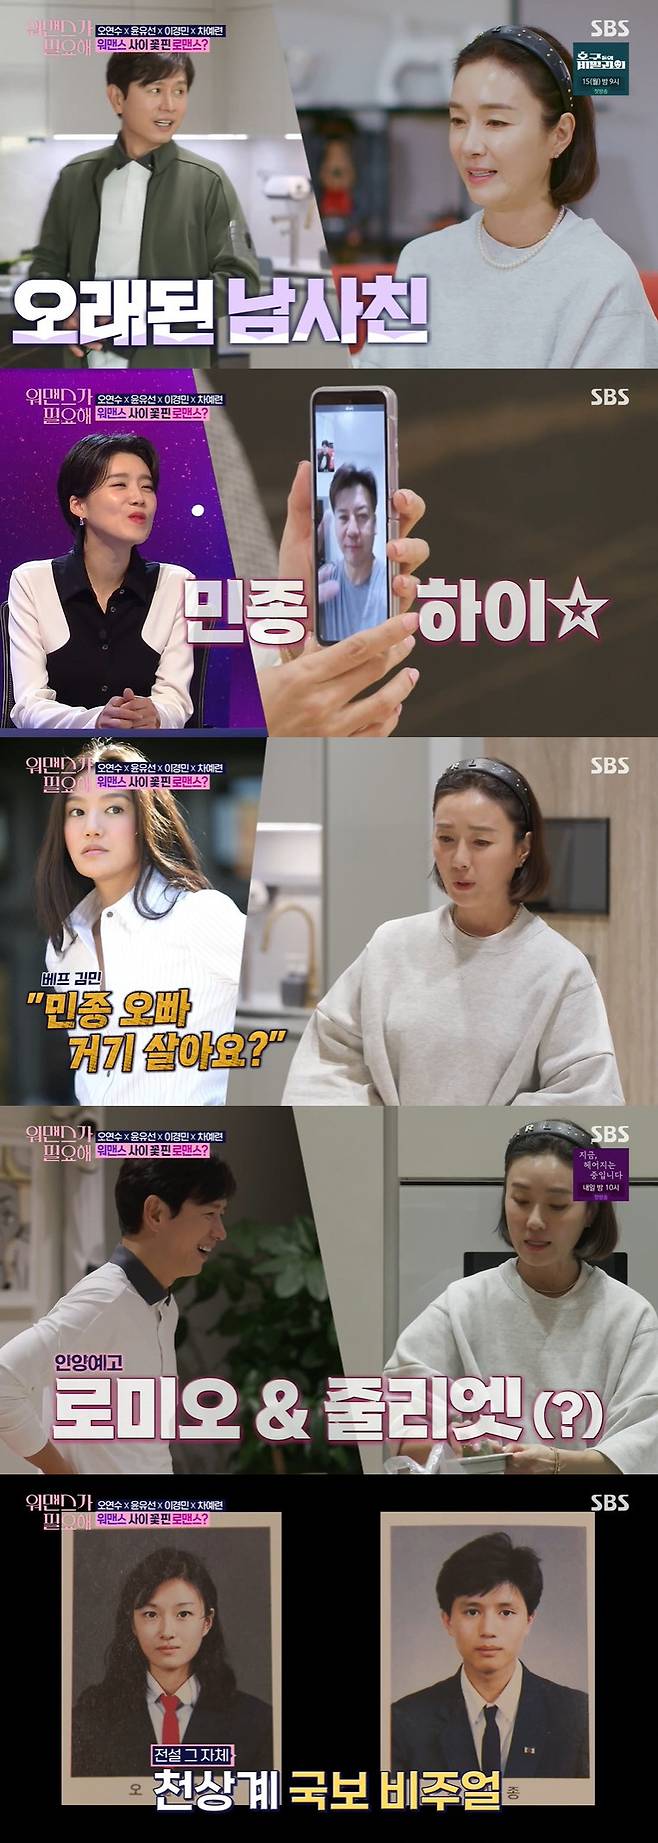 One Mans War Kim Gu reveals the second sex of late.On the 11th SBS entertainment program One Mans War is needed, Oh Yeon-soo, who introduces Kim Min-jong, a South Korean singer, to the four-member Seongsu-dong.Oh Yeon-soo, Yun Yu-Seon, Lee Kyung-min, and Cha-ryun, the four members of the Seongsu-dong cooked at home and prepared guests.New Face guest is Kim Min, a long-time male cousin of Oh Yeon-soo.Oh Yeon-soo was Kim Min-jong and Anyang-Yonggo alumni. I did broadcasting class together and did not work with Son Ji Chang.I have been seeing you for over 30 years when I meet you. Kim Min-jong said, When Ji-chang has a brother, he does not say that if he does not have a good sound of Hyeong-su. Oh Yeon-soo made a video call to Son Ji Chang.Son Ji Chang is currently living in the United States for business; Oh Yeon-soo covered the phone after only talking about the business, but the call has not yet been cut off.Kim Min Jong laughed at the nickname of Oh Yeon-soo in high school, saying, It is still stupid.Lee Kyung-min is also close to Kim Min-jong, who jokes that Kim Min-jong and Oh Yeon-soo could have been dating in high school.Oh Yeon-soo said, I made a mando corporation, because I did a broadcasting team together.But he made another child, and Kim Min-jong also laughed at Disclosure, saying, Who did not you date? I was very popular with Mando Corporation, and there were seniors who told me to report to you if there was anyone who was accumulating with Oh Yeon-soo.Kim Mins steamy Kim Gu also came to visit; Oh Yeon-soo and Kim Mins celebrated, giving a surprise gift for Kim Gu, who recently gave birth to her second child.Kim Gus second is a daughter. Kim Gu said, I did not do this with my acquaintances.Son Ji Chang and Oh Yeon-soo were gum-tampers recognized by all acquaintances; Son Ji Chang and Oh Yeon-soo speak on several phone calls a day.If your brother cant call Sister, he calls me right away, Cha Ye-ryun proved.Yun Yu-Seon wondered about the Ju Sang Book Cha Ye-ryun couple and Oh Yeon-soo said, I was her nickname One Plus One.Im stuck wherever I go, he said, certifying that he is a tough gum-tampered couple.Six people played the truth game and got the mood.Kim Gu asked, I have regretted marriage and Yun Yu-Seon replied, There is, and Oh Yeon-soo replied, No.Cha Ye-ryun, who was worried, replied no, but Cha Ye-ryun proved to be false and laughed.Oh Yeon-soo teased, What if you regret it when youre newlywed?Oh Yeon-soo, who has never regretted his marriage with Son Ji Chang, said, We do not love it crazy, but we did not regret it.I think I would have been worried the same with anyone. Lee Ga-ryung was living in the Jecheon Outdoor House.This is a place where my grandfather and grandmother often visit as a place where their families heal after leaving. Lee Ga-ryung said, Drama happened while working as a model.I came out as a friend, and in 2014, I was ready for the drama, but I was not able to work for a long time because I was not good at it. Lee Ga-ryung, who has been living in obscurity for a long time since then, said, I have a good opportunity in seven to eight years and have done this work.So, marriage writer divorce composition became my masterpiece. Lee Ga-ryung went to a nearby large house garden and picked up various vegetables and cooked them skillfully.Lee Ga-ryung, who took a nap after enjoying a relaxing outdoor rice bowl in the yard, woke up to her mothers arrival.My mother was so nervous about seeing Lee Ga-ryungs phyto-scene in the song The Joining Song. Because of her memory of getting off Midway for death during MBCs Indomitable Chamae.Lee Ga-ryungs mother said, When I got off, my heart was sore, but I wanted to do a god who killed the child again because I was a god who was a phyto god. Lee Ga-ryung showed tears as if he were crying.Lee Ga-ryung said, After I passed, I looked back and I saw that I took a god, not a work a year, but eight years ago. Its been eight years since I took eight gods.My mother said that Lee Ga-ryungs Actor was a lot of trouble, I thought I should stop because I was not going to go, but I would be an entertainer.Then I think I did well this time. 